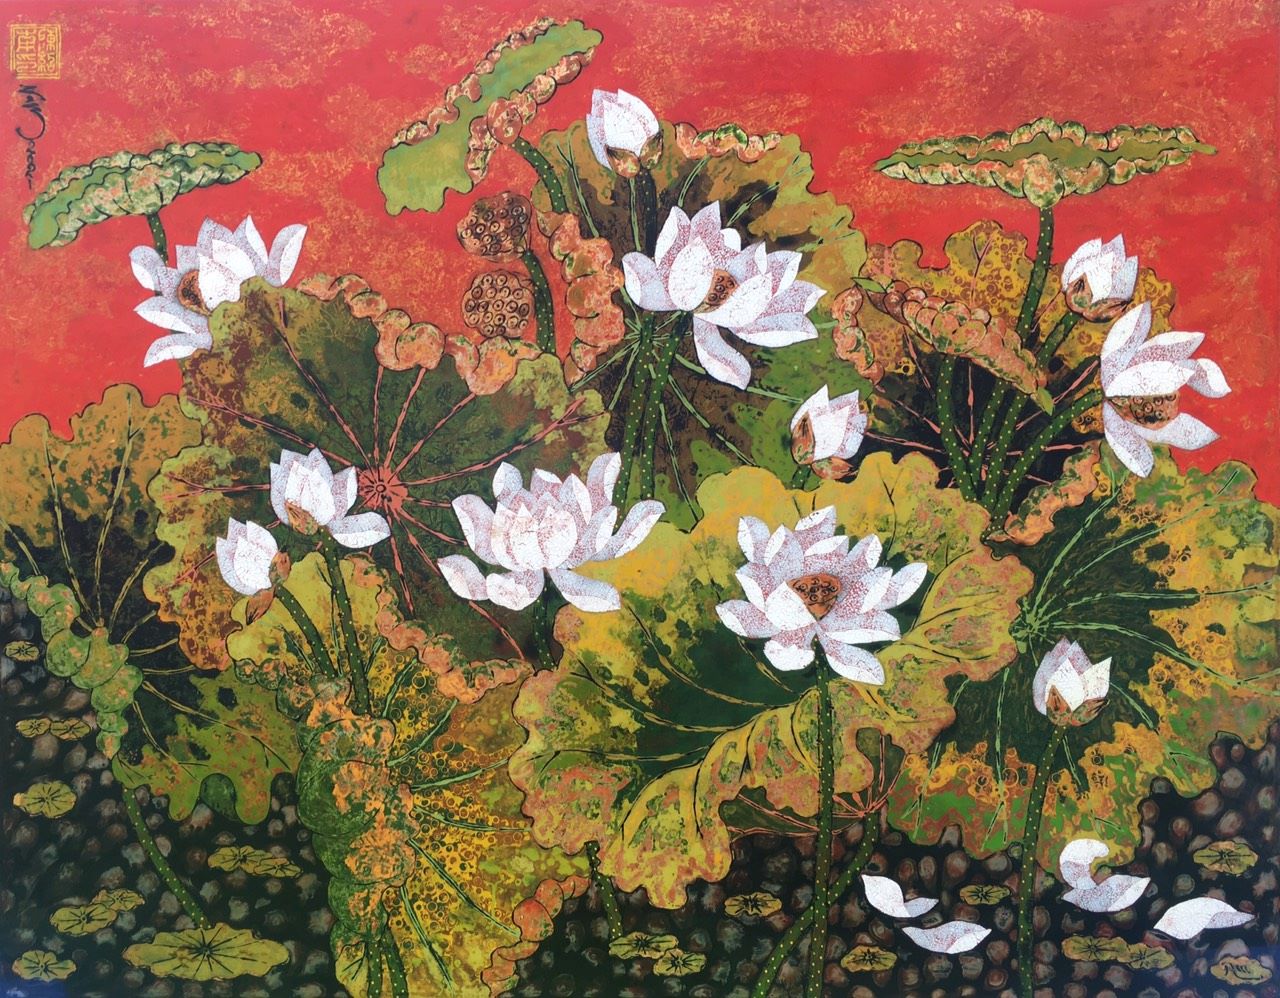 Waggle - Vietnamese Lacquer Paintings Flower by Artist Tran Thieu Nam